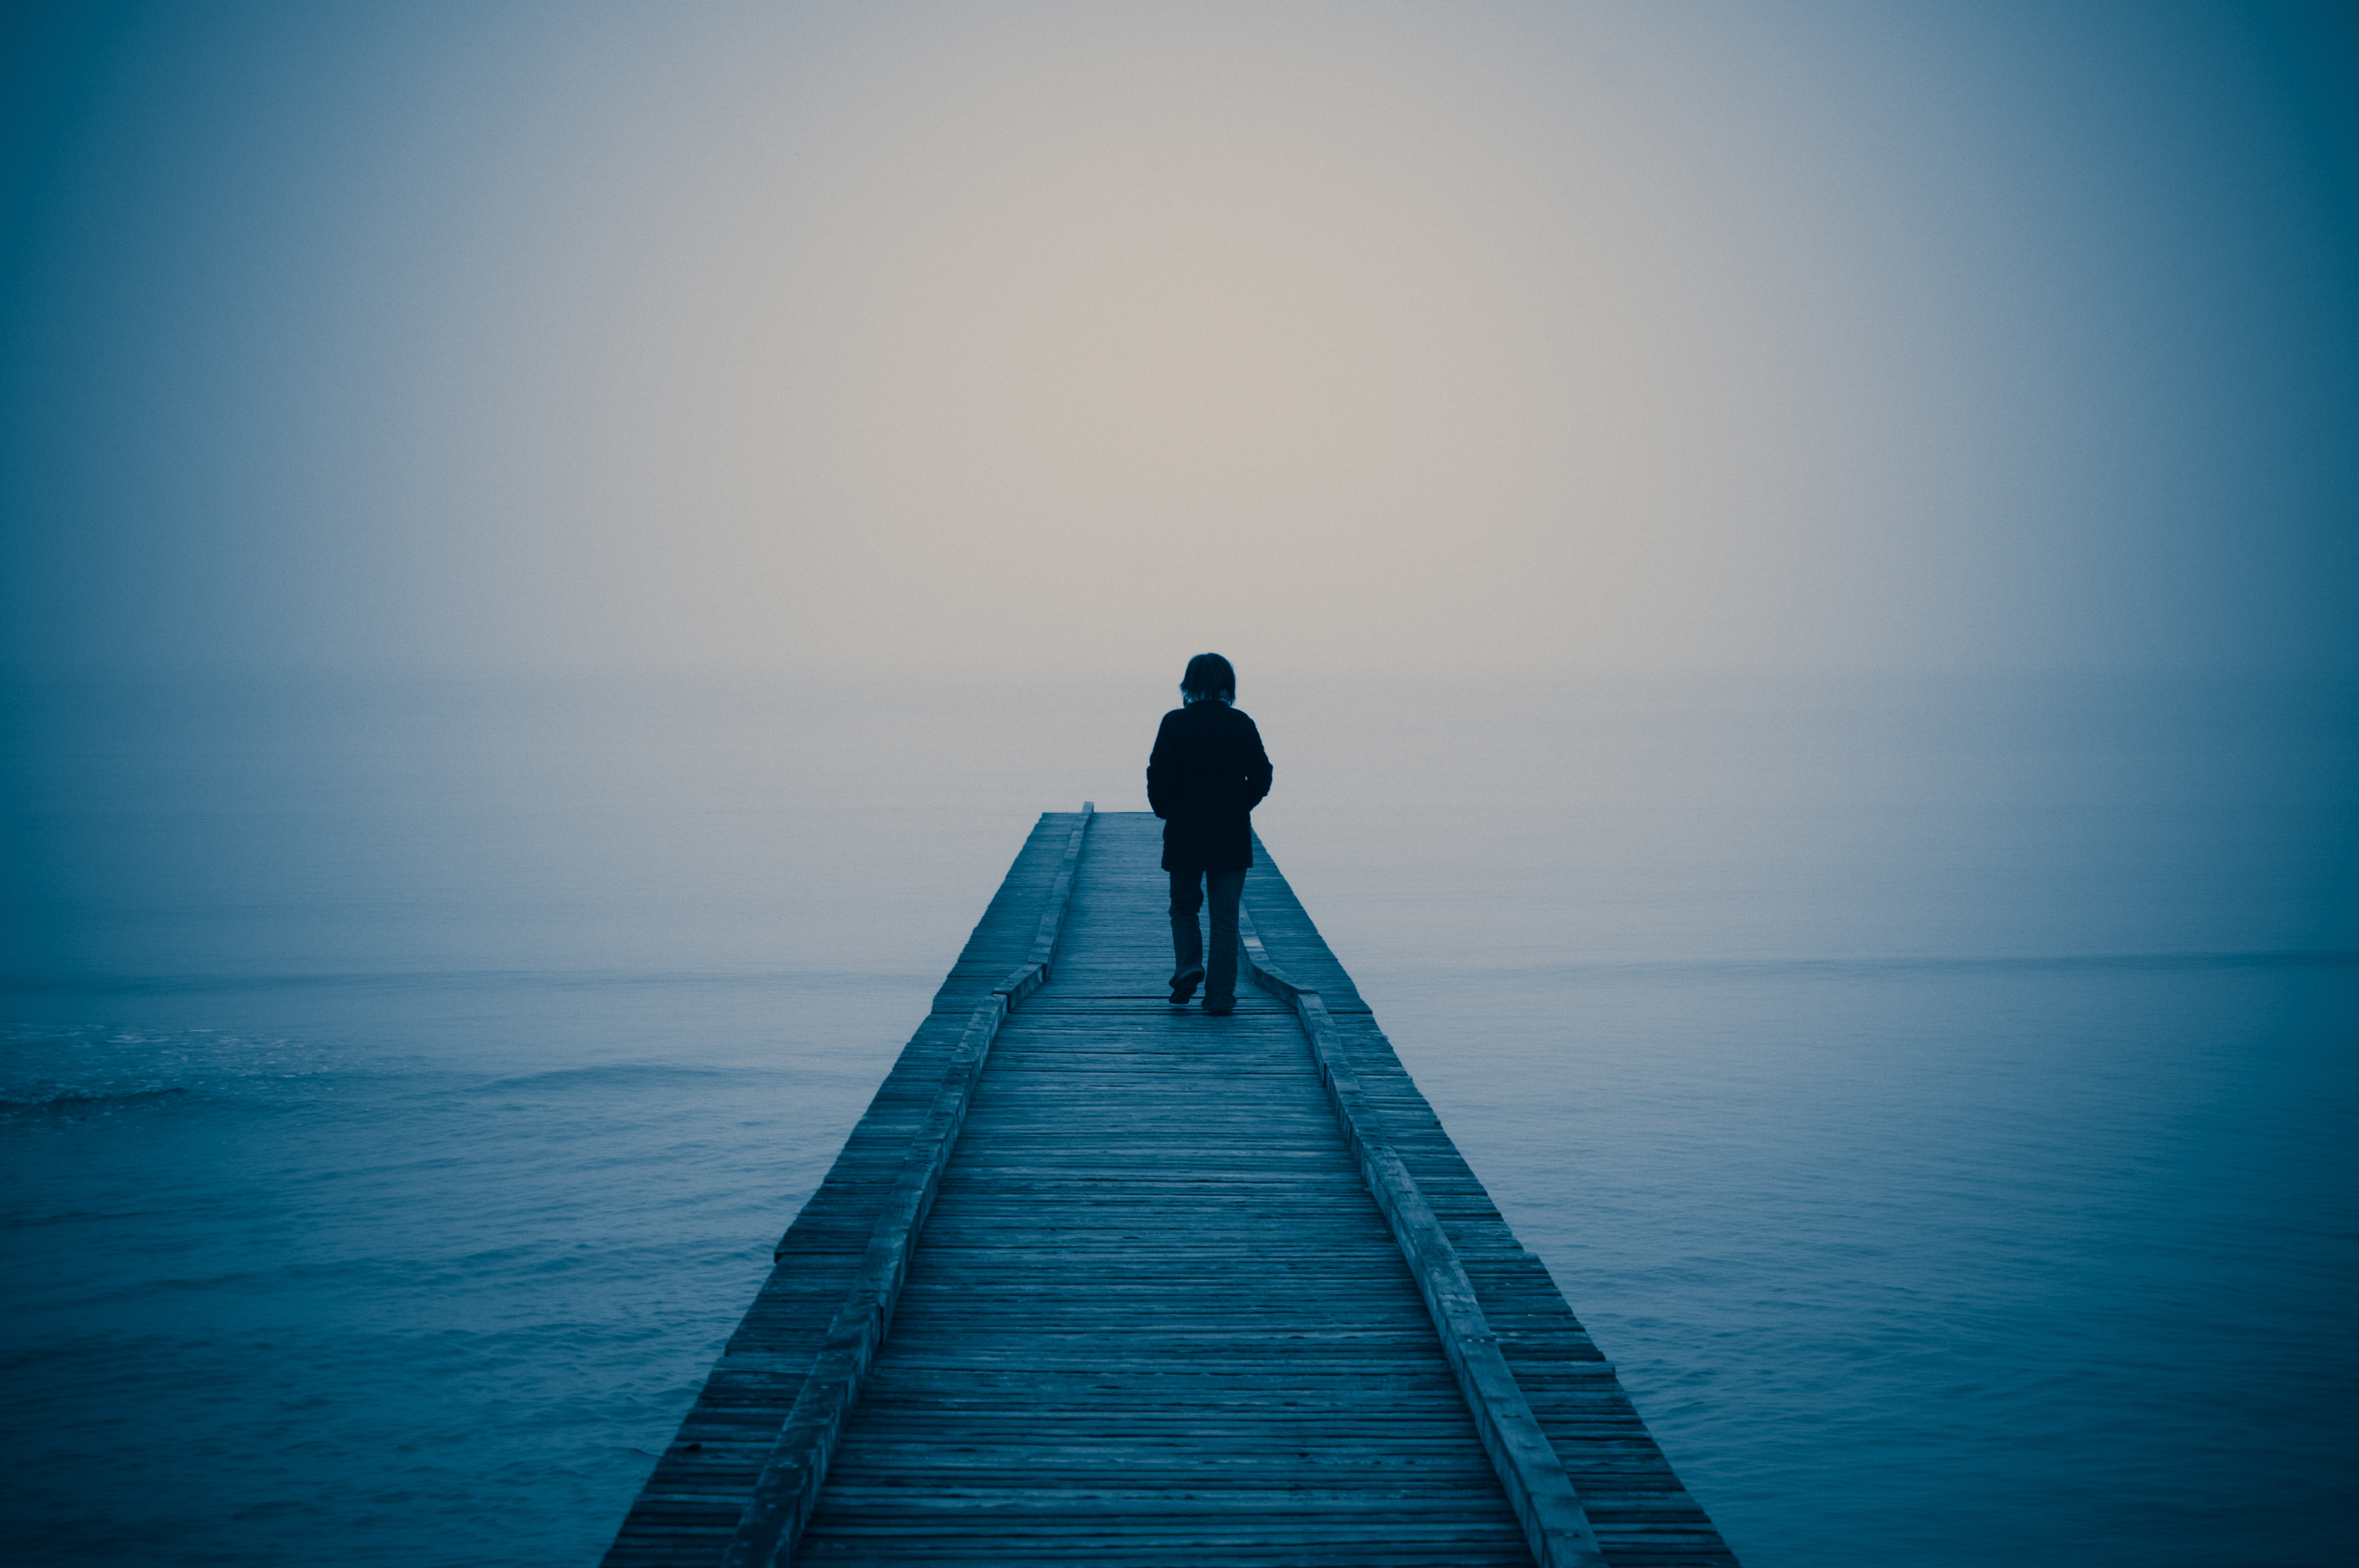 A lonely person is walking out on a bridge